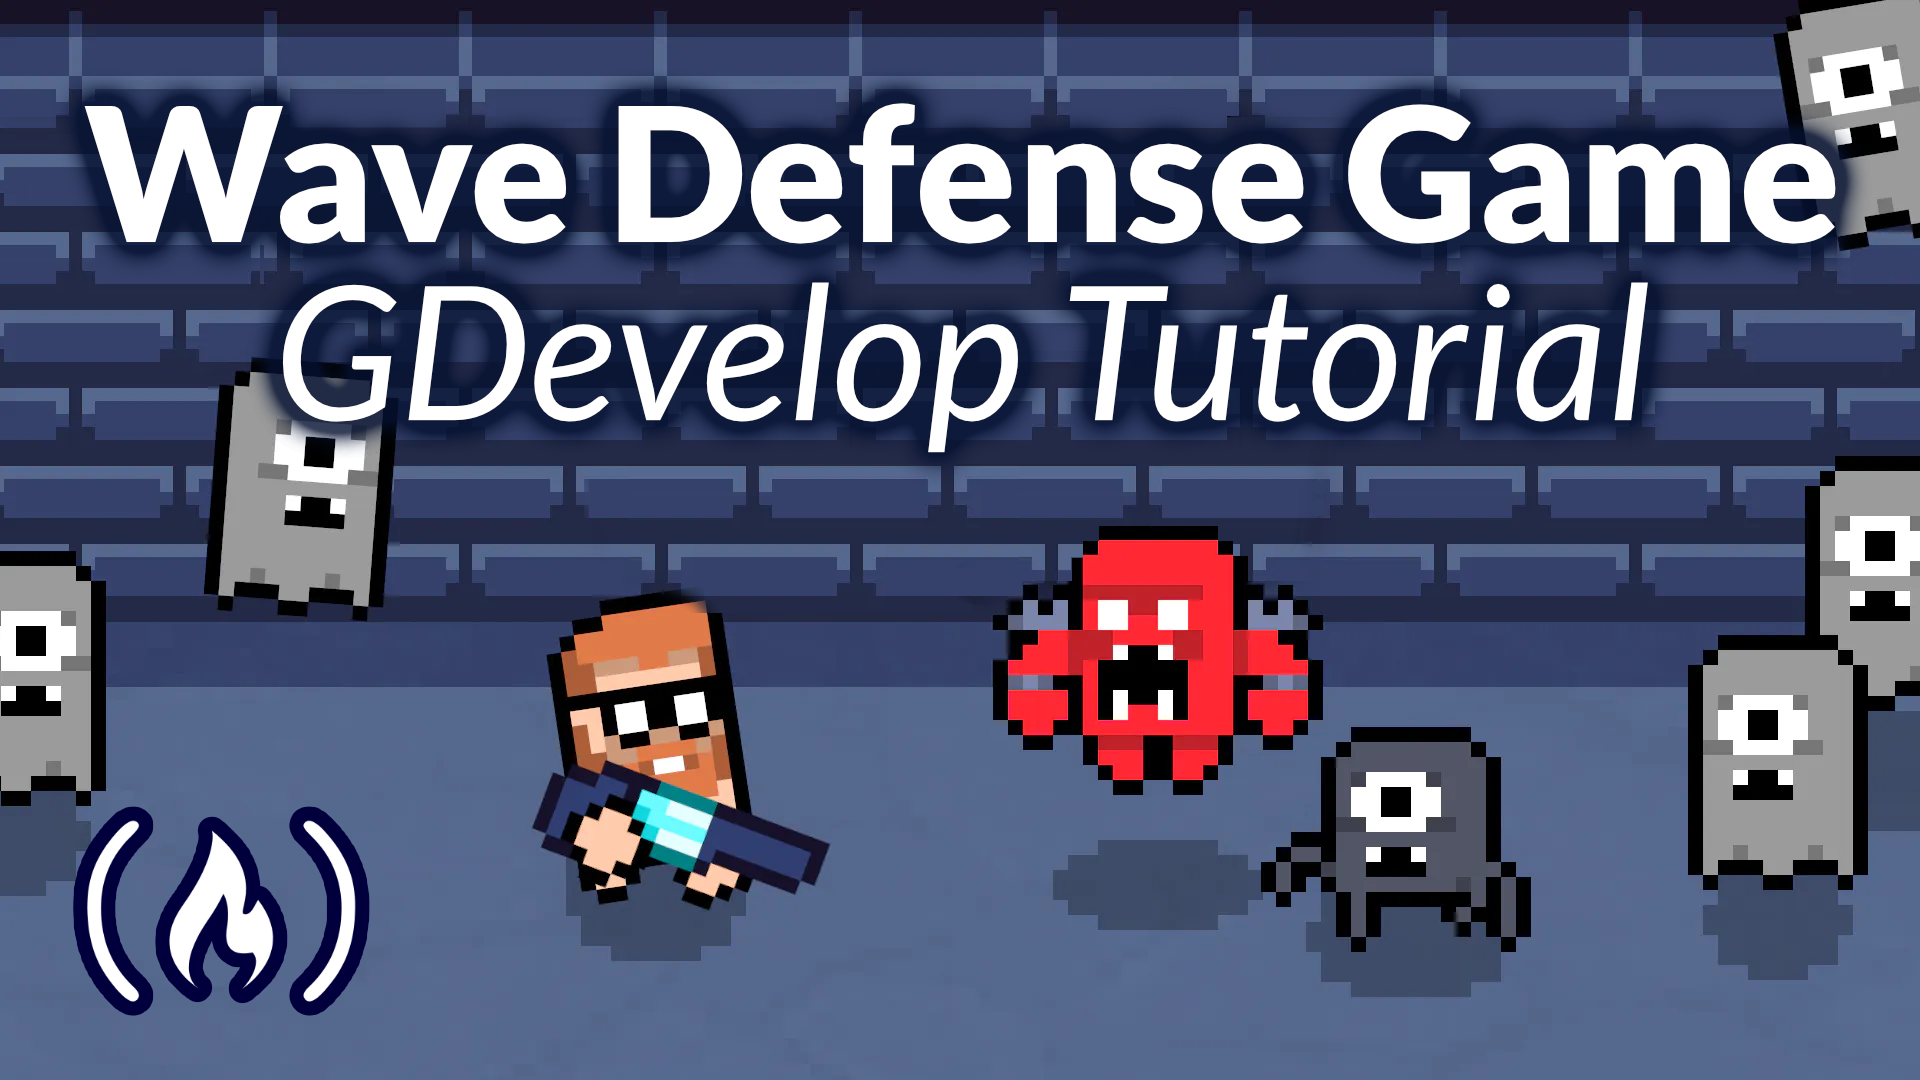 Image for Create a no-code game with GDevelop